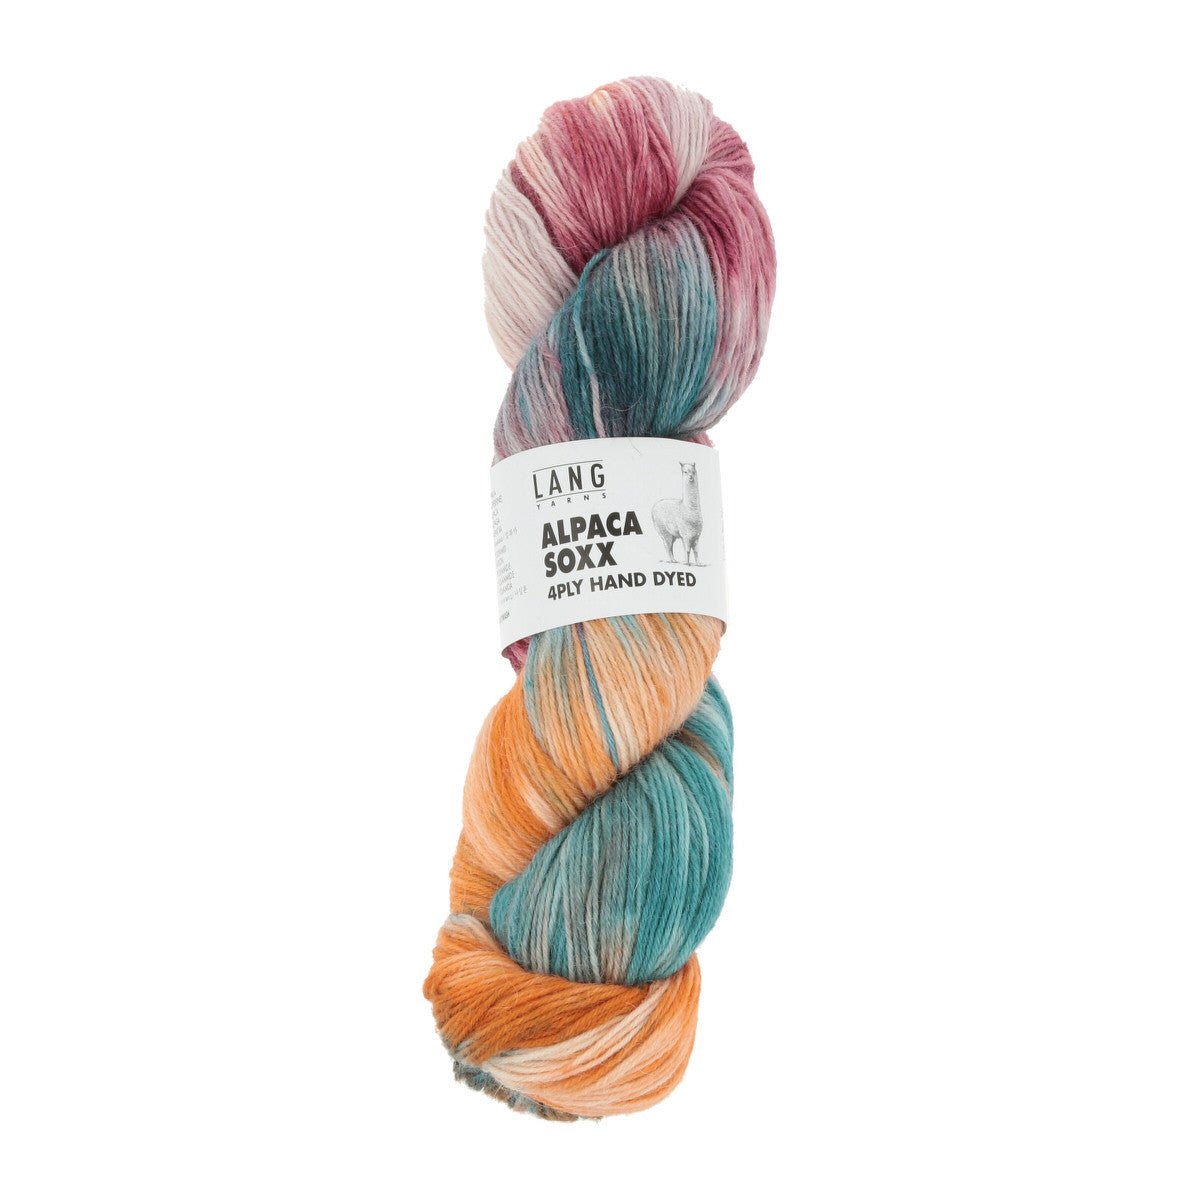 ALPACA SOXX 4-FACH/4-PLY HAND DYED 1132.0006 - Lang